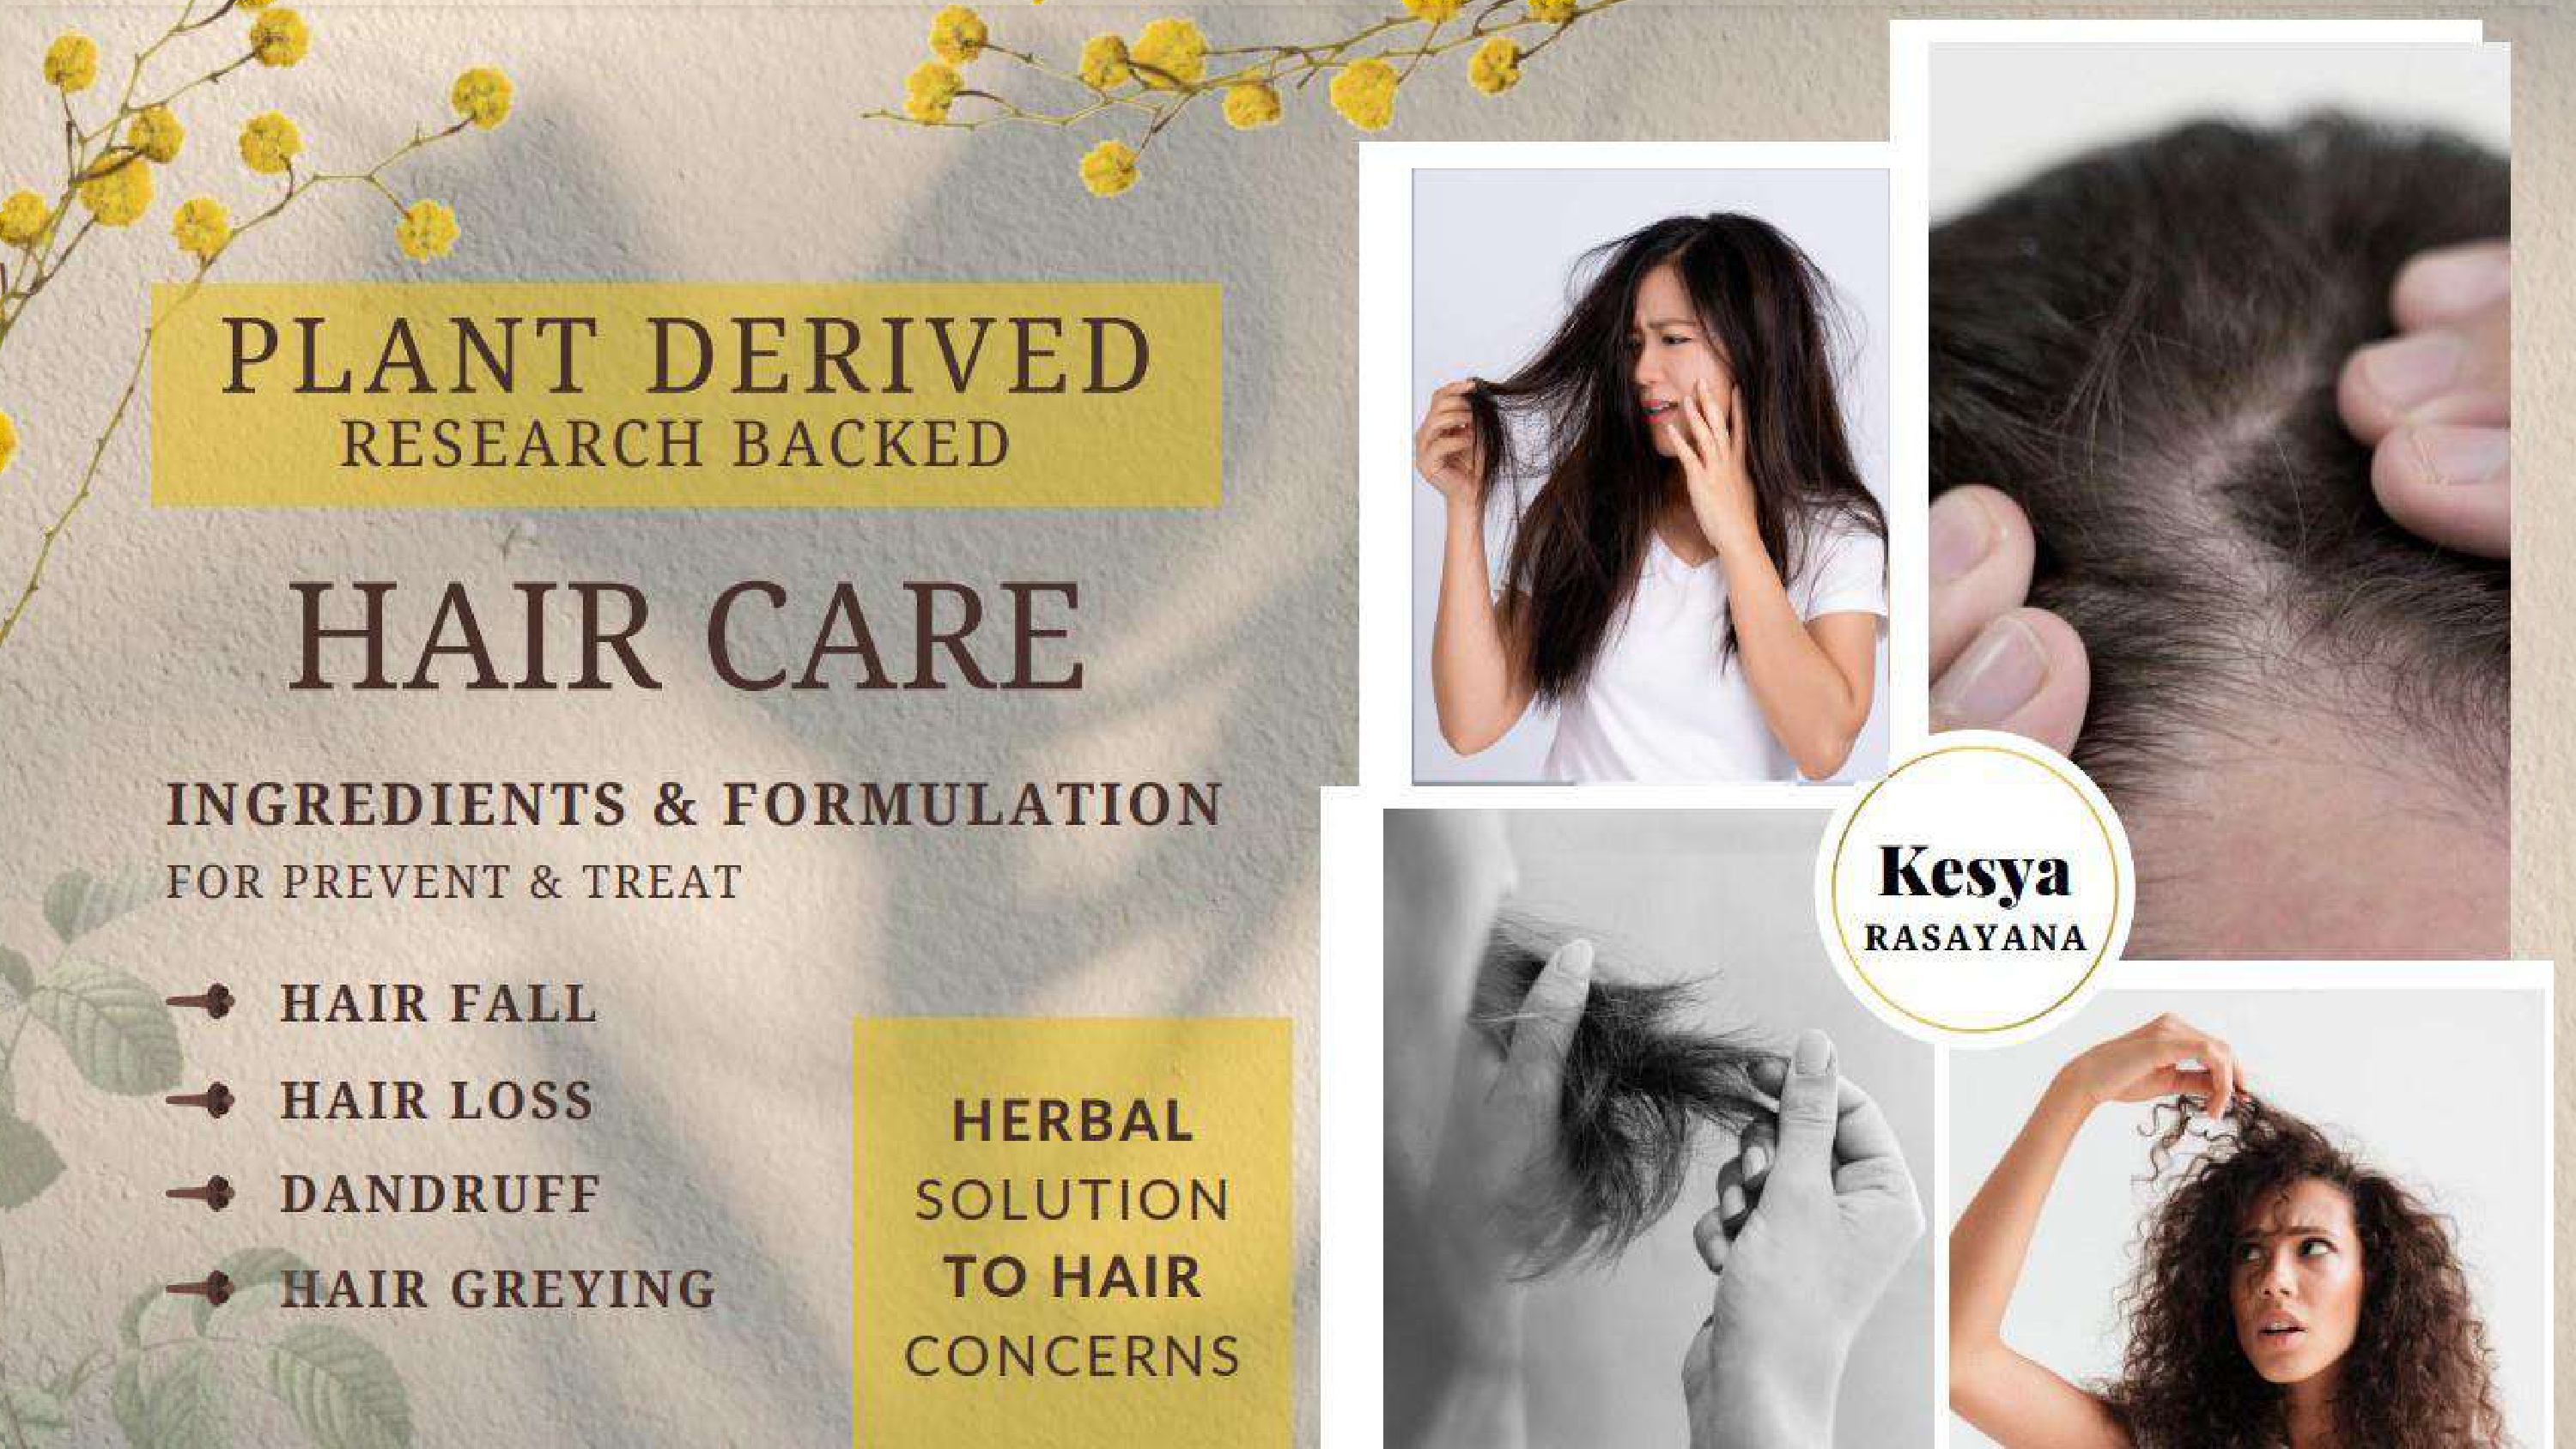 Research-backed-hair-care-formulation
                                           